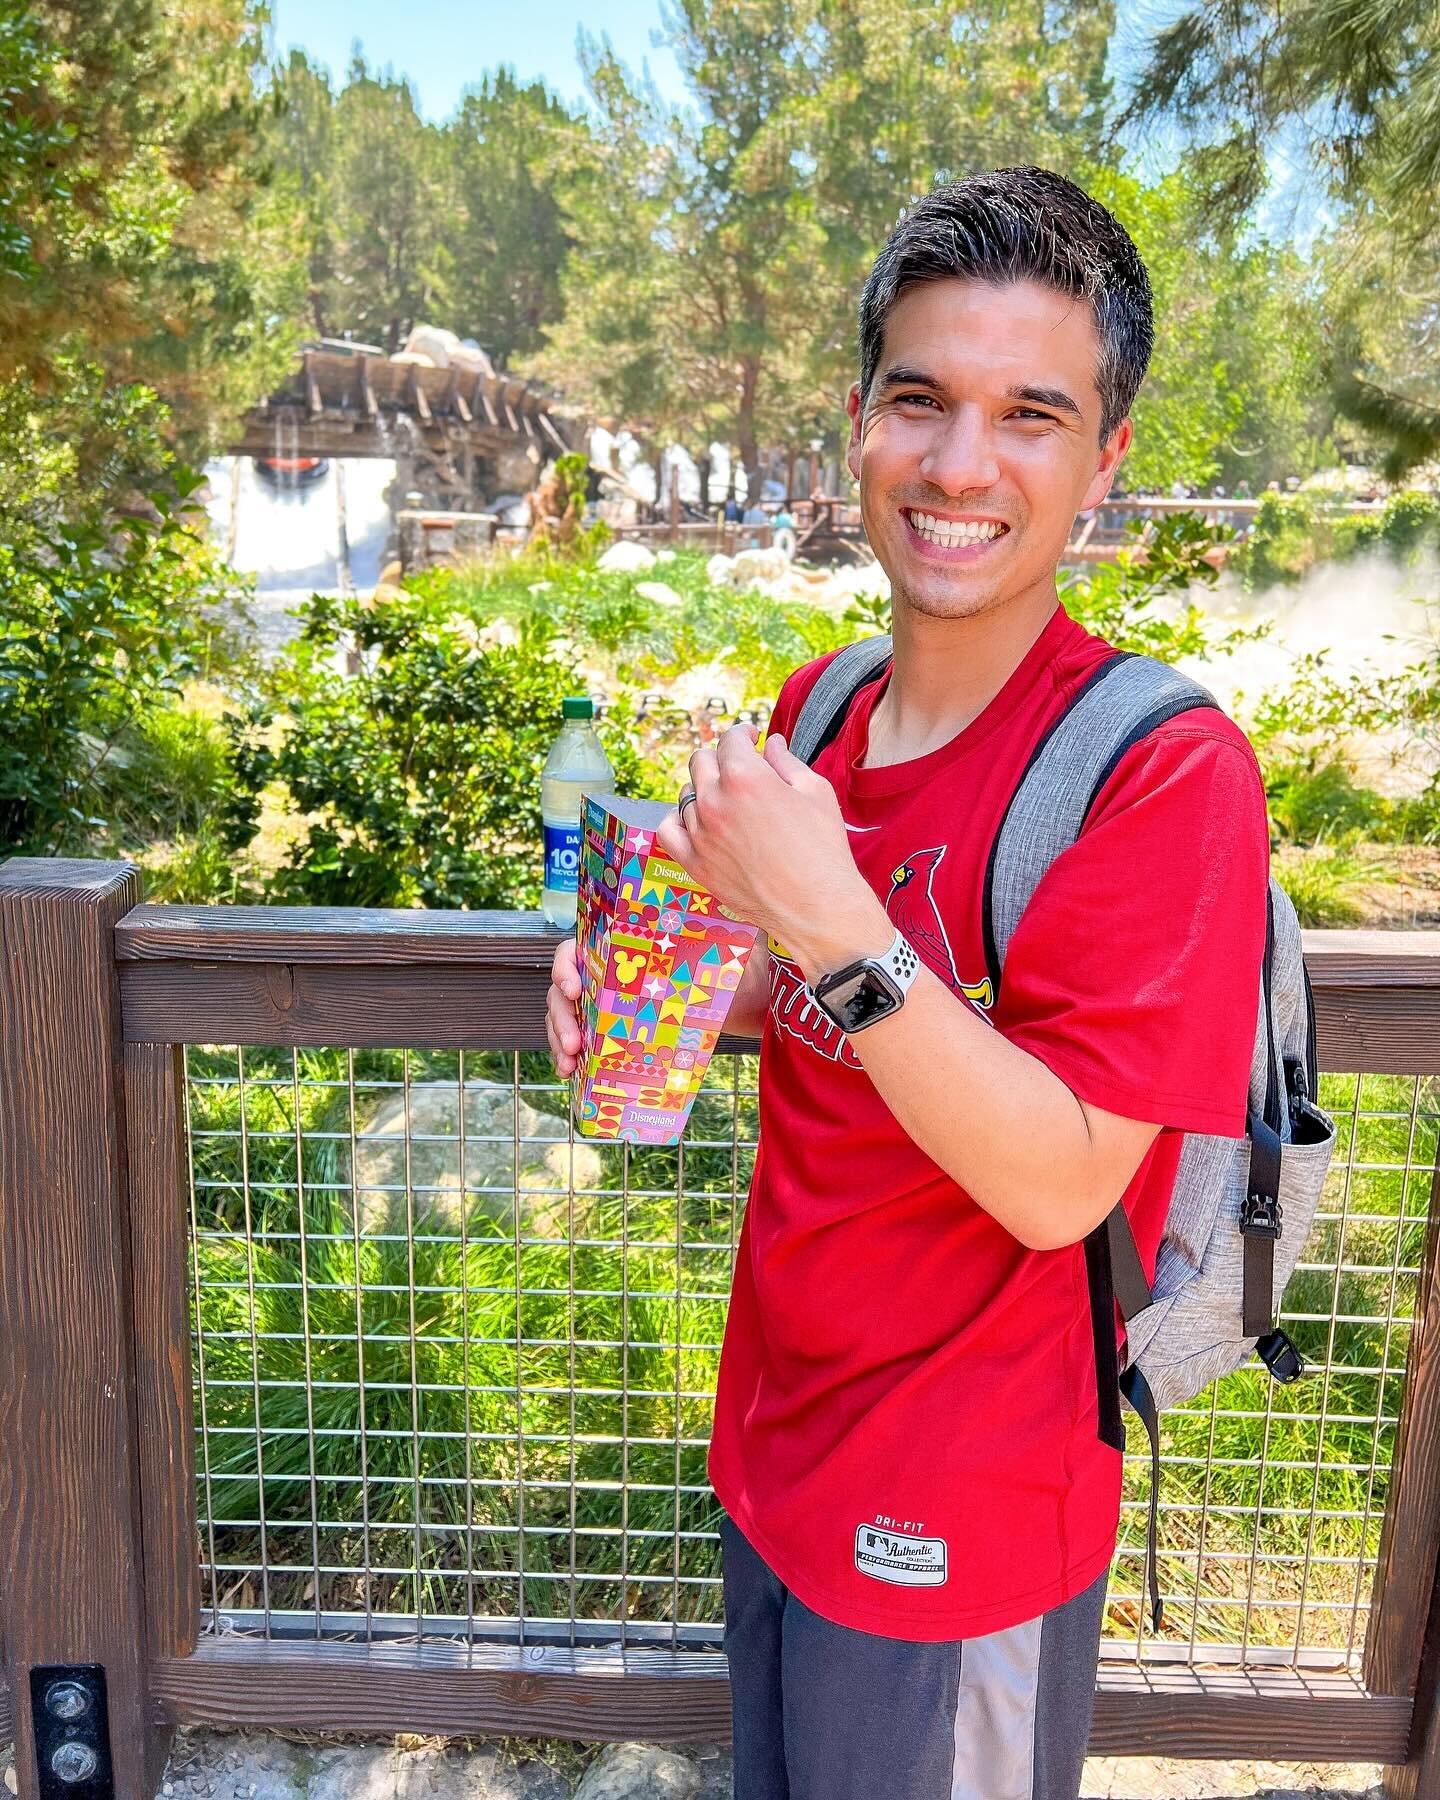 Wishing we were walking through Grizzly Peak with some popcorn ☺️🍿 

On this week&rsquo;s episode of Market House, we cover the latest Disney news and share our top five ways to relax at the Disneyland Resort! ✨ 

Do you have a favorite place in the